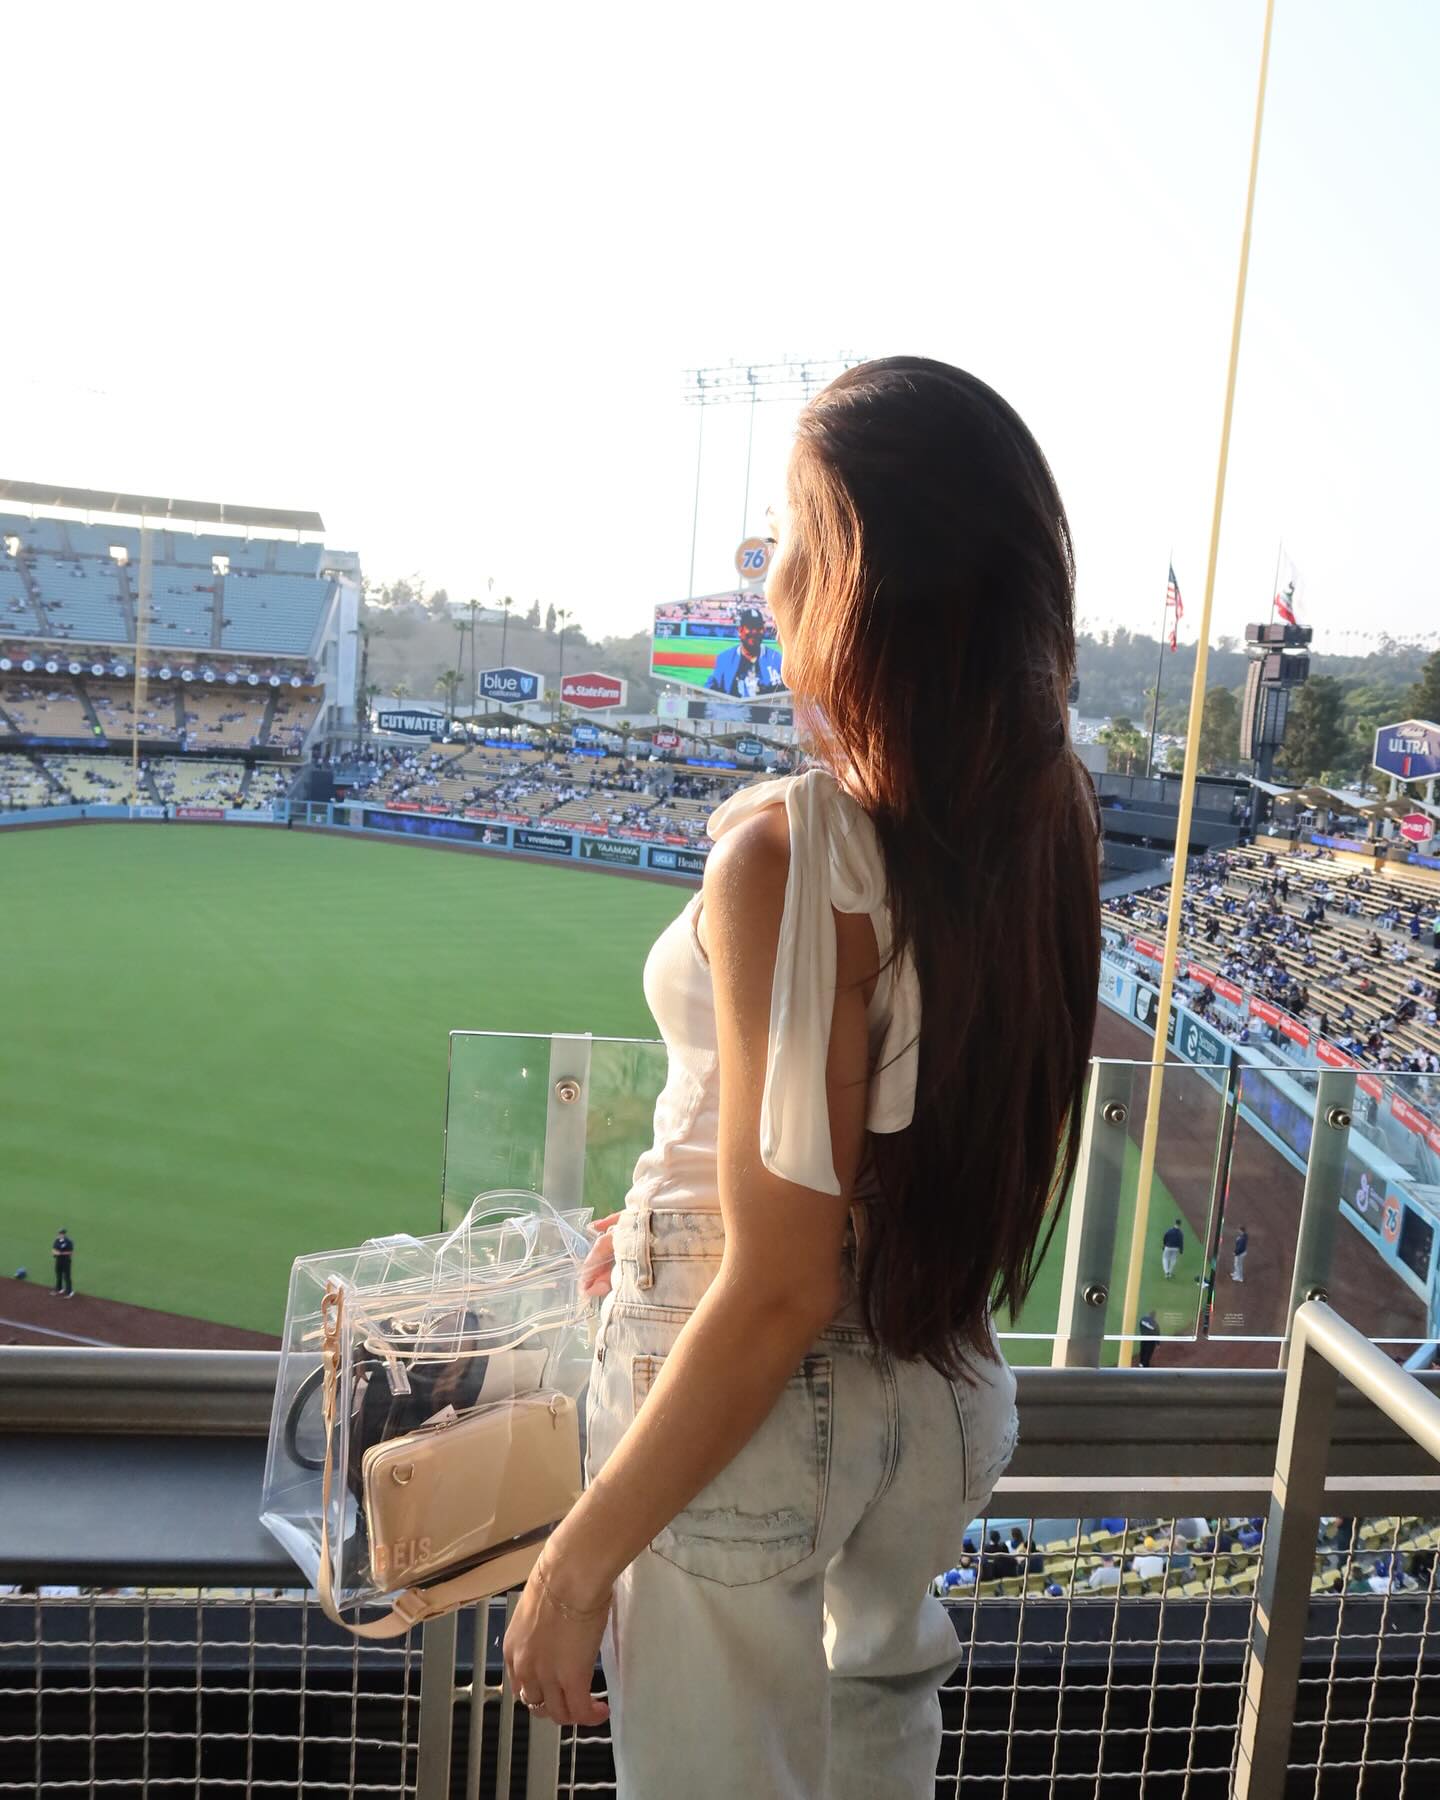 Take me out to the [ @beis ] BALL GAME! ⚾️ if you could bottle up the feeling of summer, this day felt just like that! Celebrating the newest addition, STADIUM TOTE, & a Dodger win 👏🏼🤩✨✨